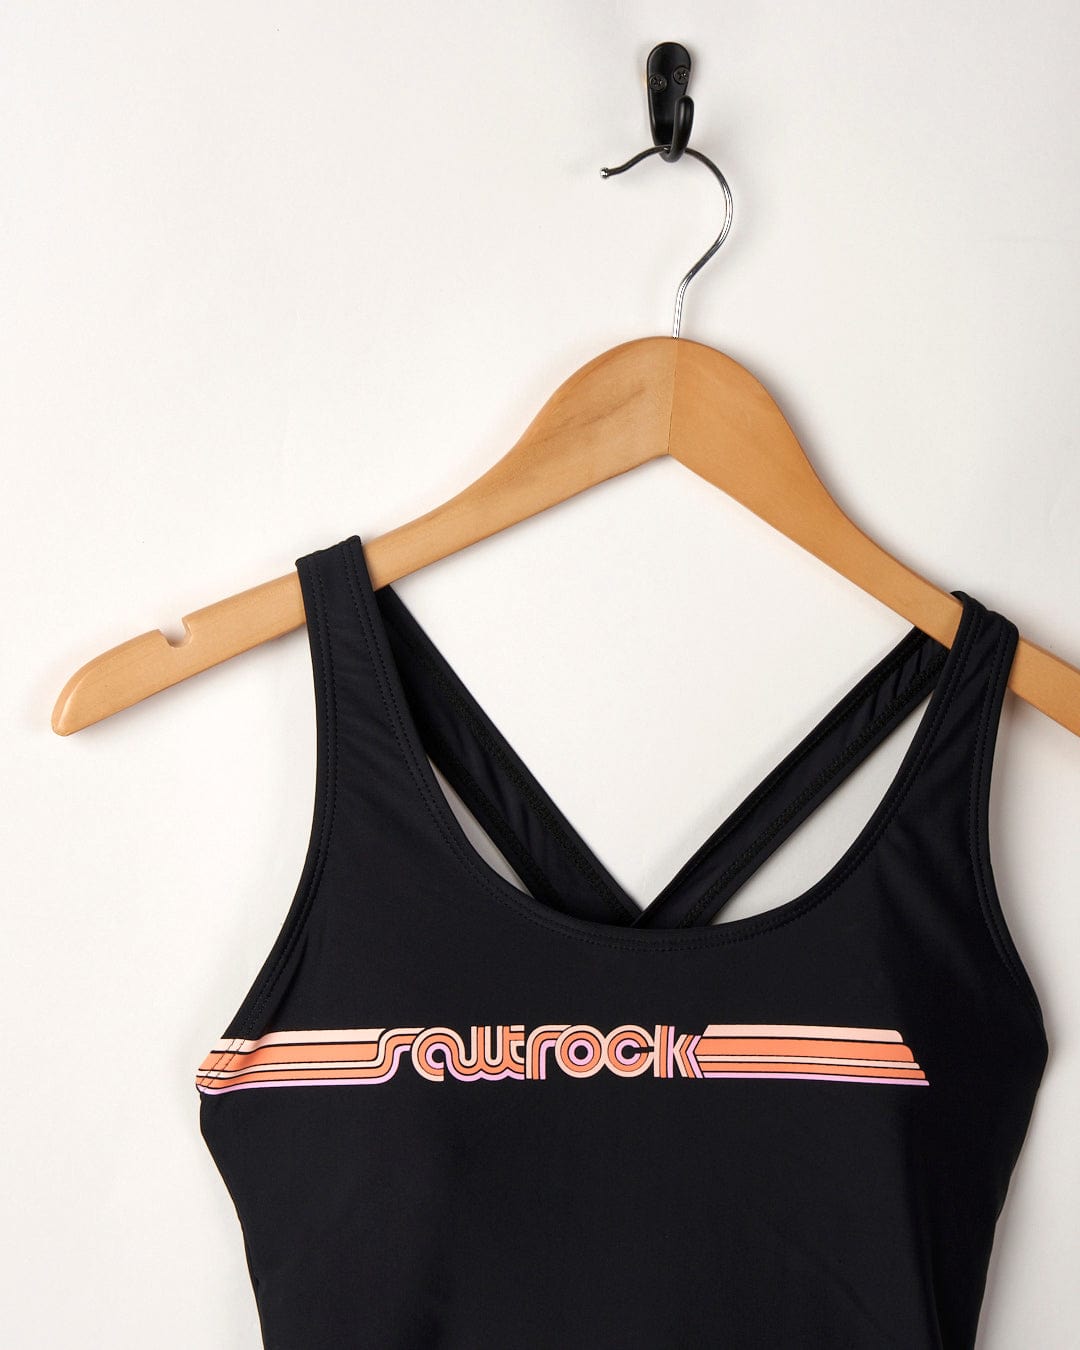 Corrine Retro swimsuit in black with orange stripe detail, made from recycled fibres, hanging on a wooden hanger against a white wall.